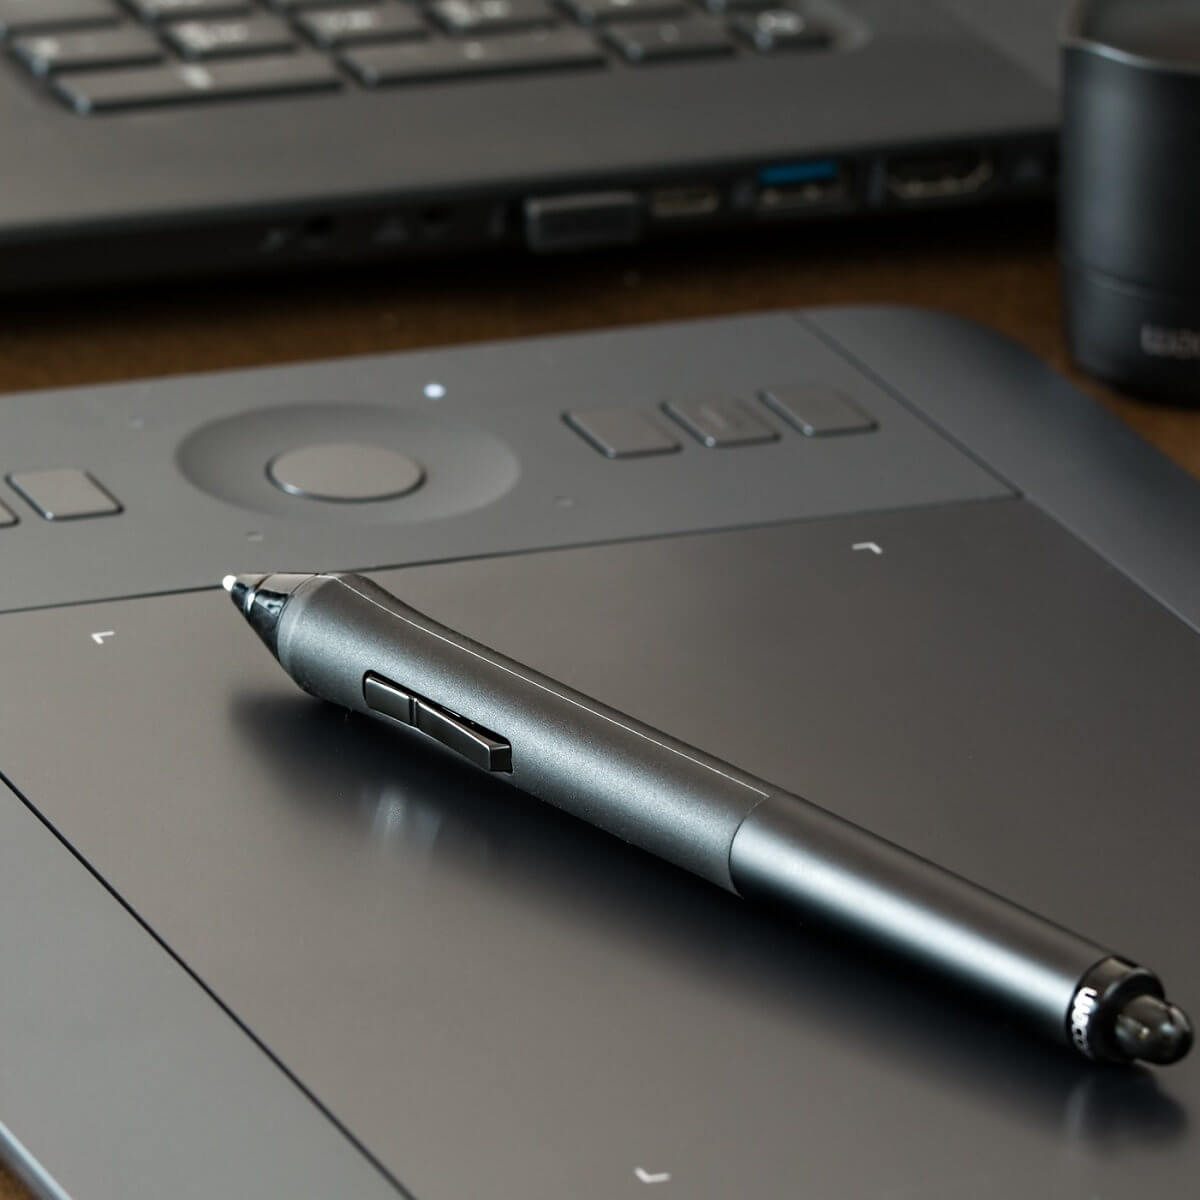 how to fix Wacom No device connected on Windows 10 error